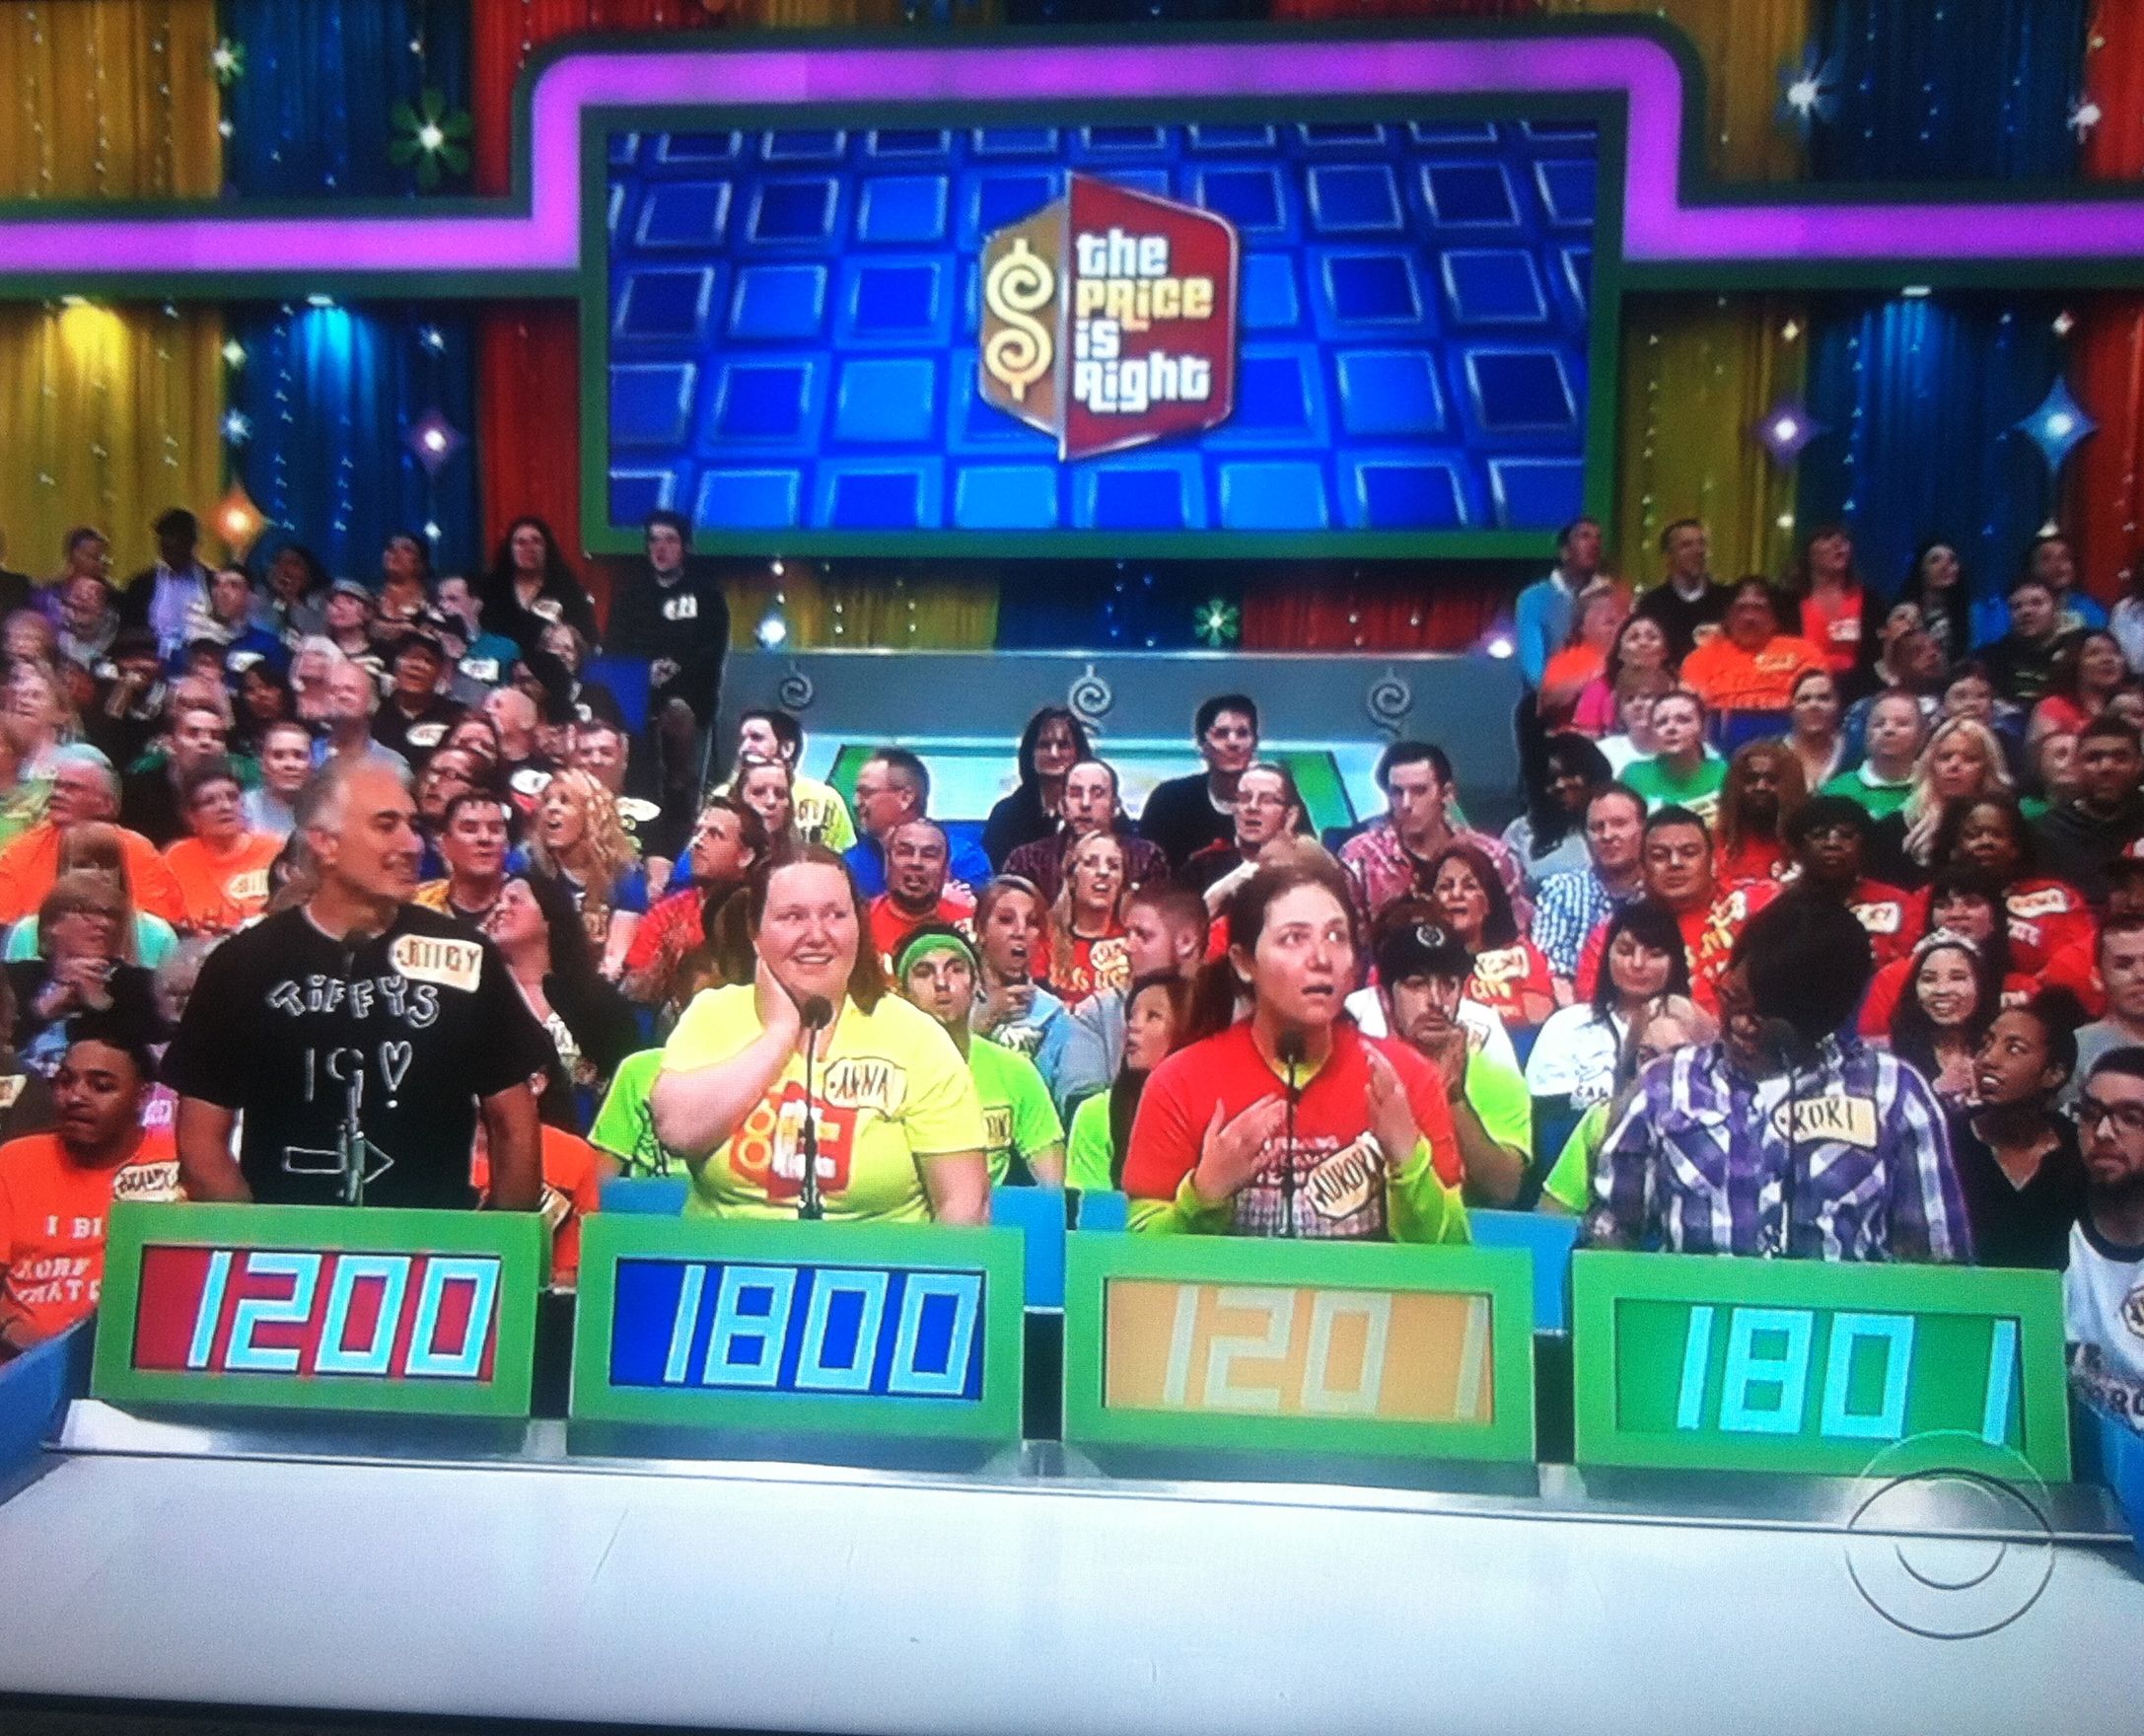 Aurora behind her podium in disbelief that she's the next person up to contestant's row on The Price is Right